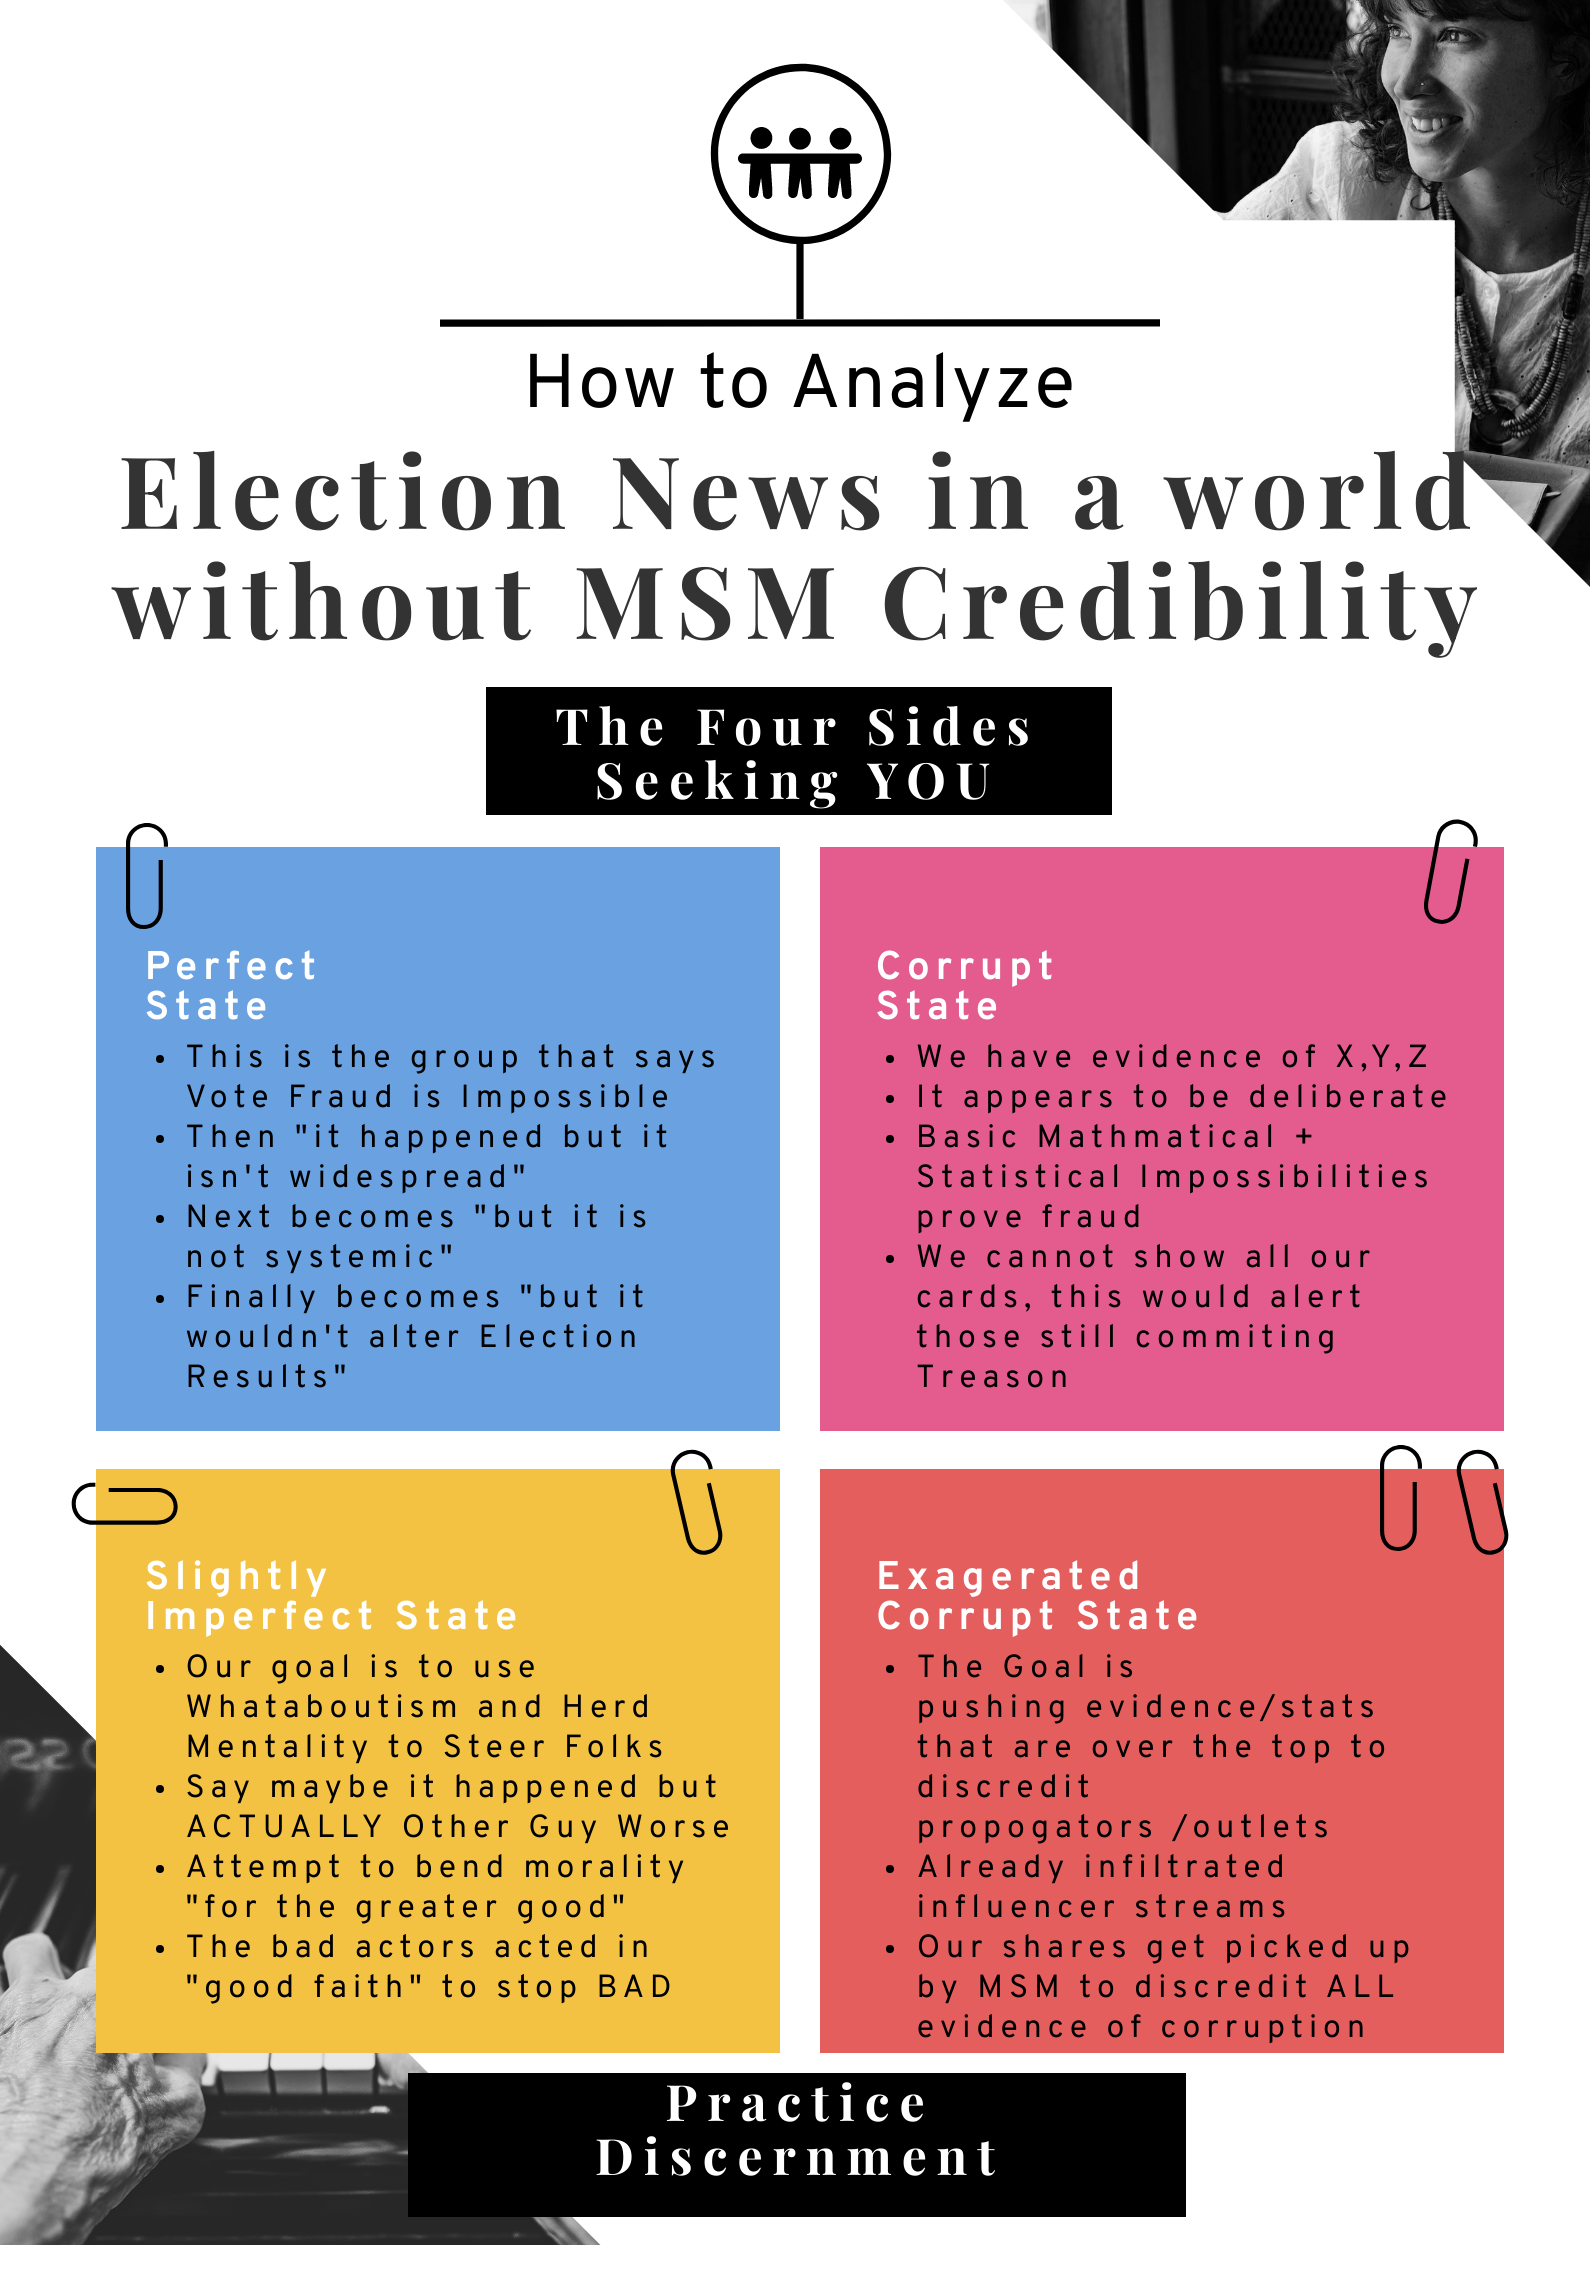 How to evaluate Post Election Information in a world without MSM Credibility — Hive